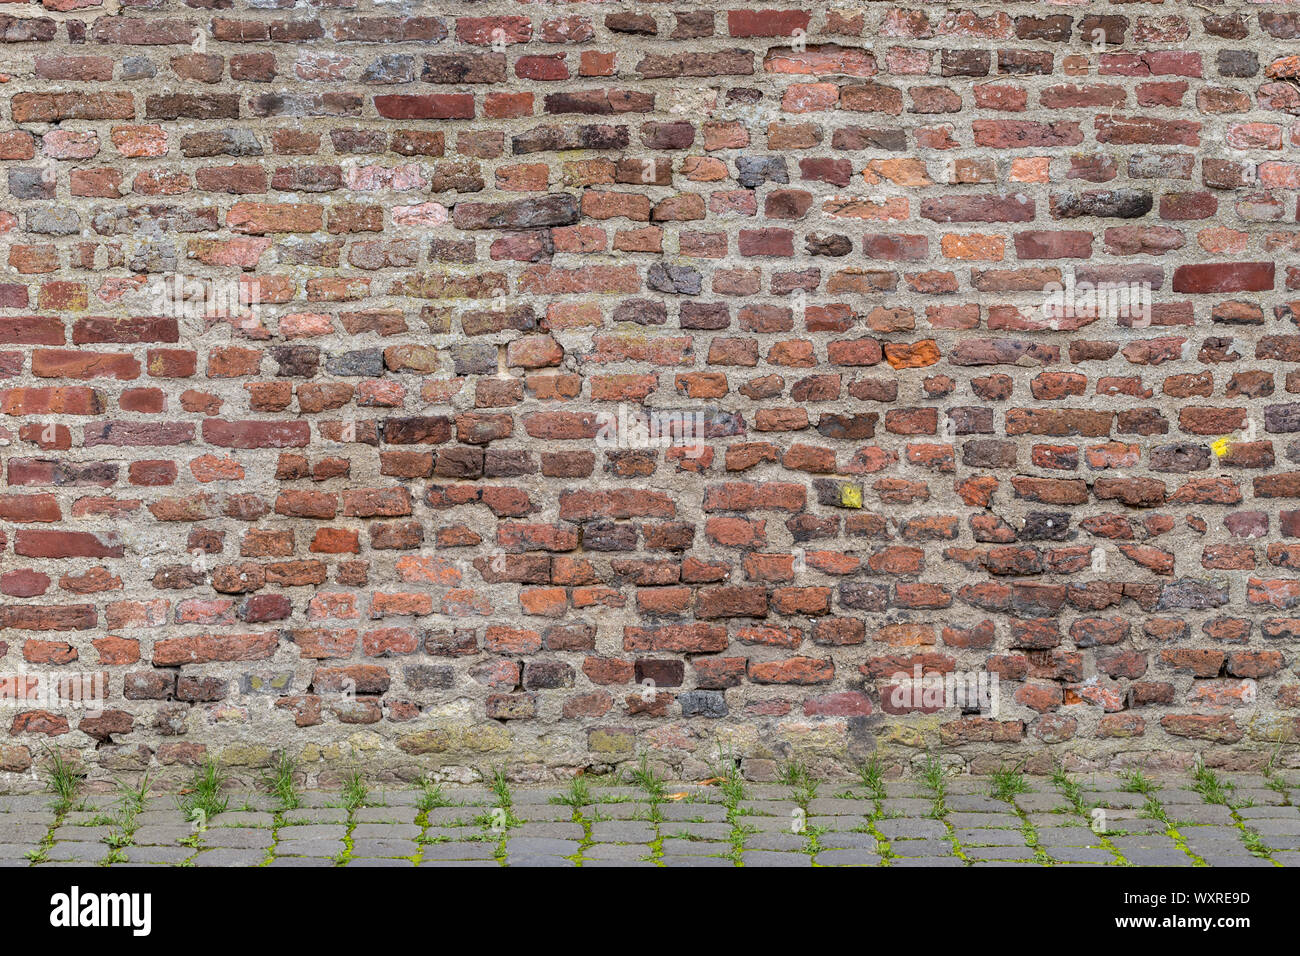 Old brick walling background/template. Empty brick wall for posters, advertising, signs, plate, etc. Stock Photo